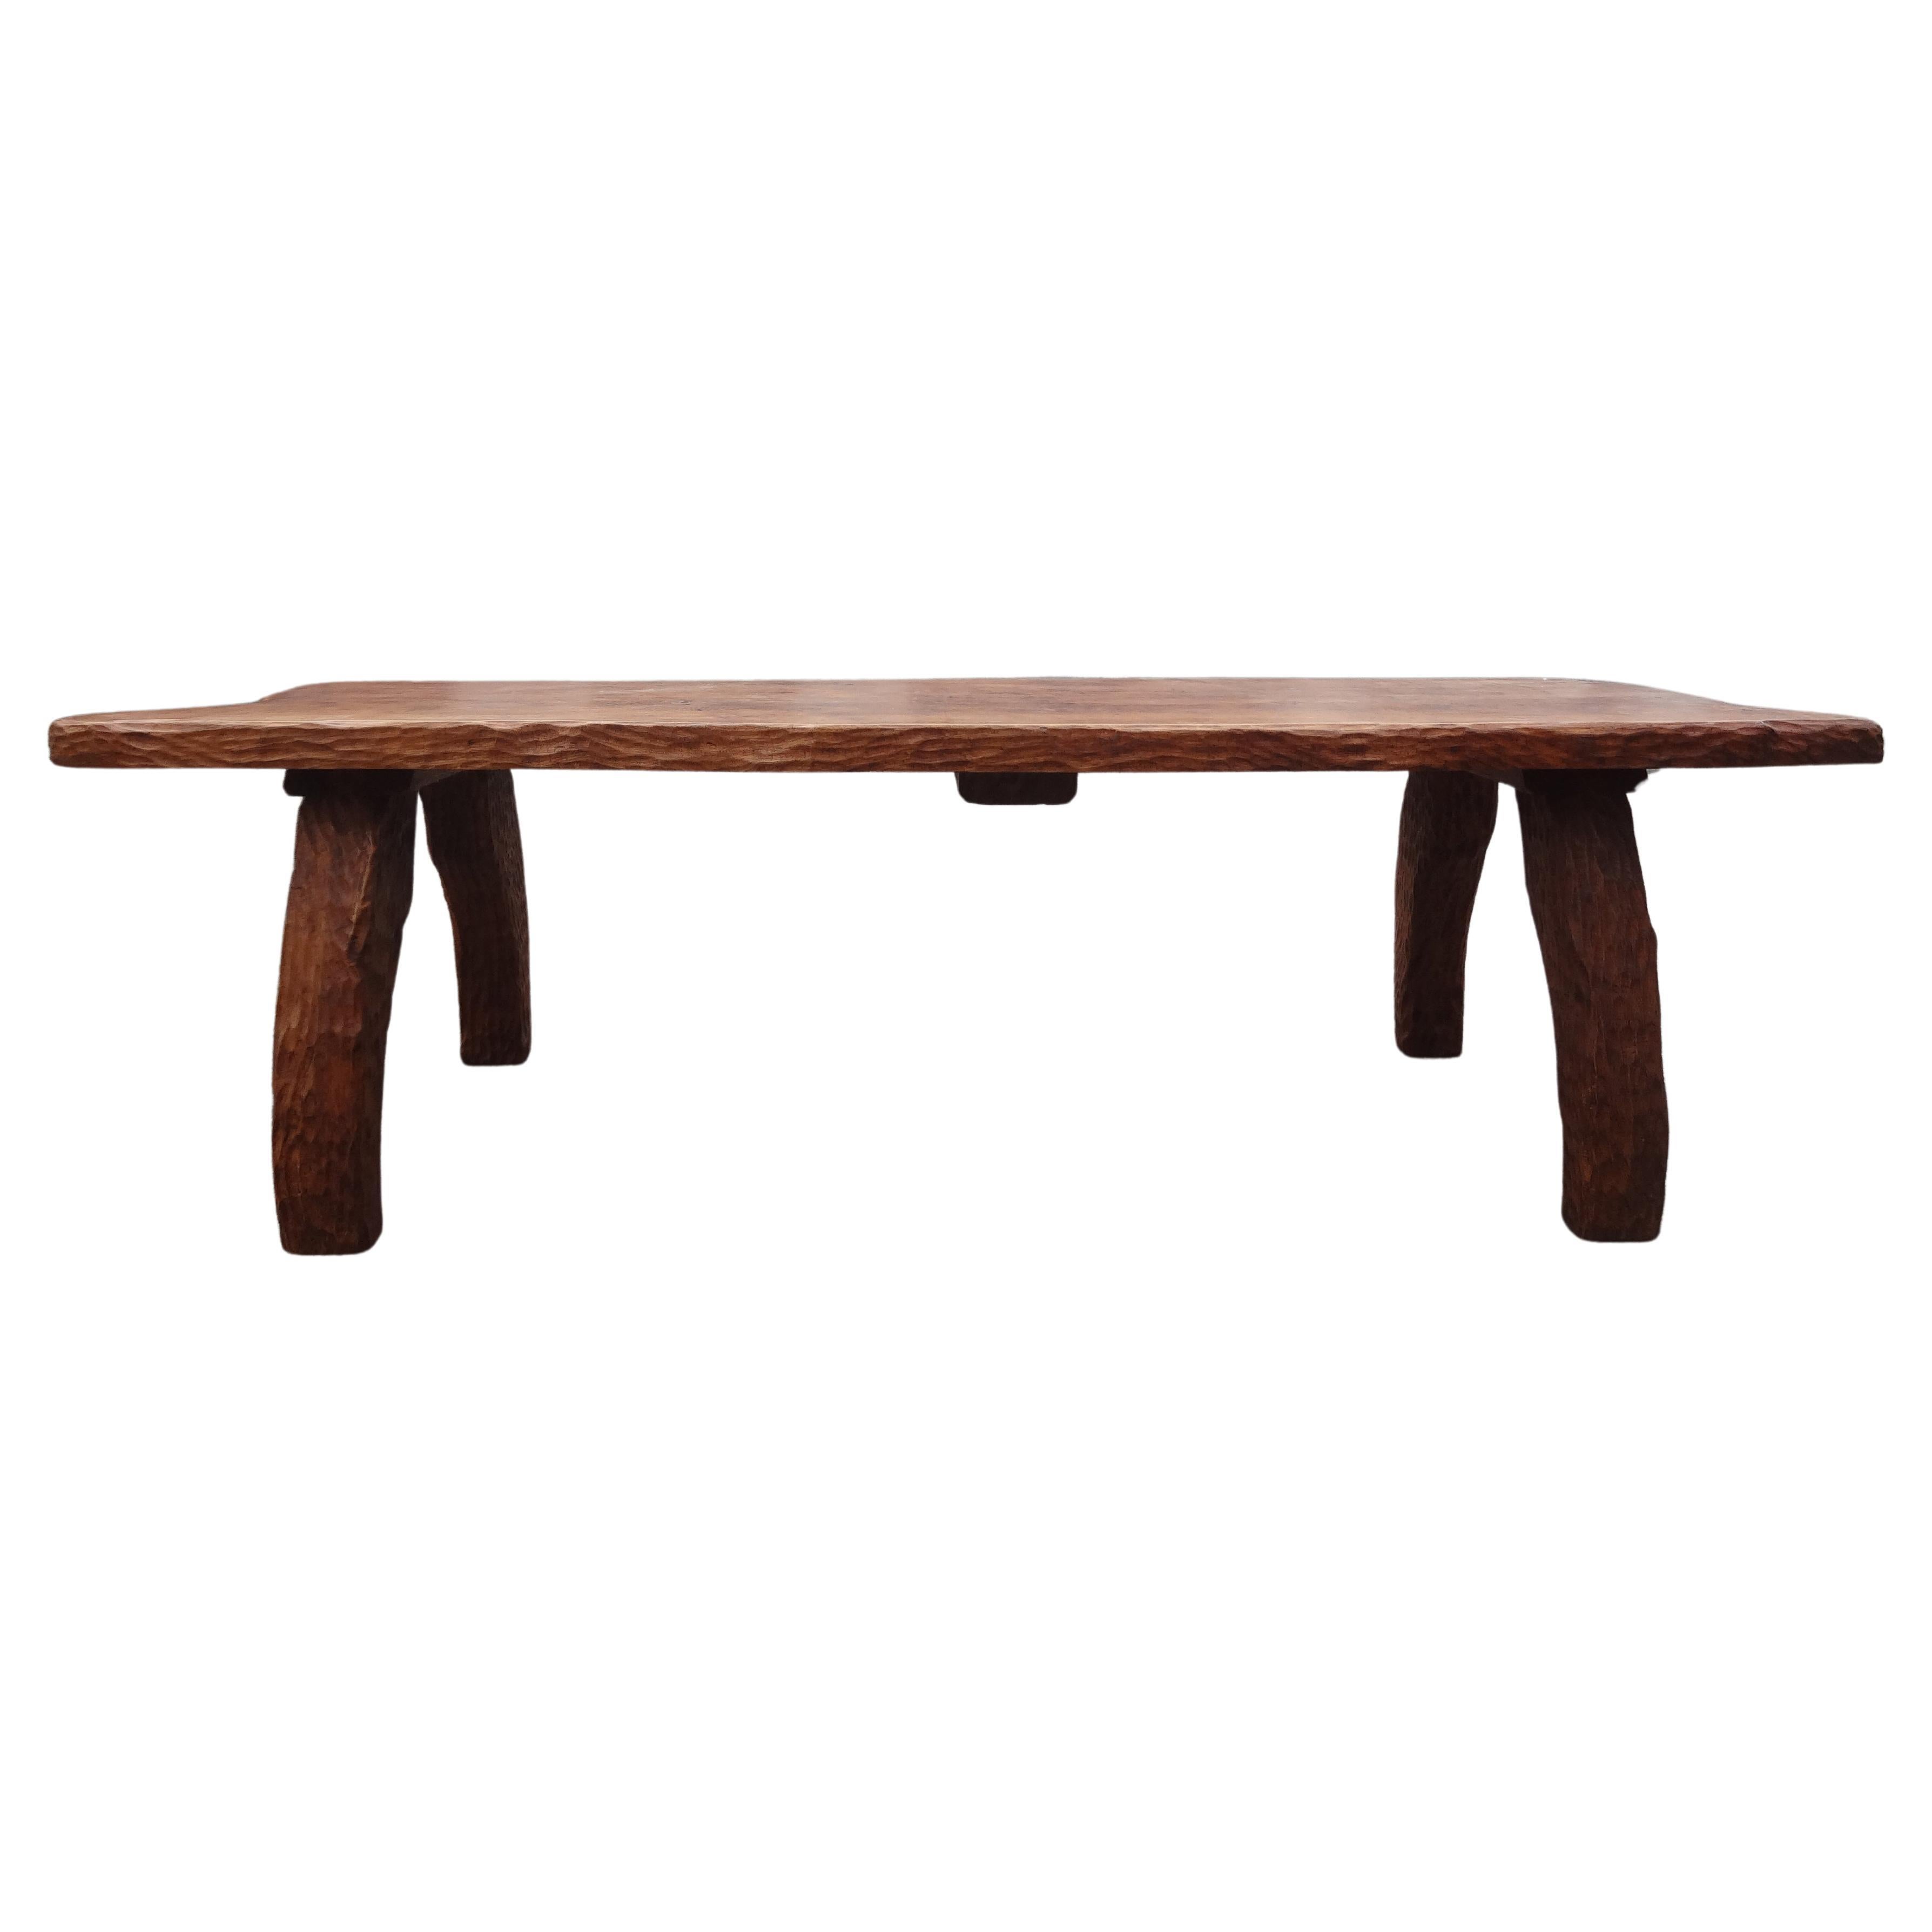 French Brutalist Elm Dining Table Or Center Table By Atelier Marolles For Sale 9